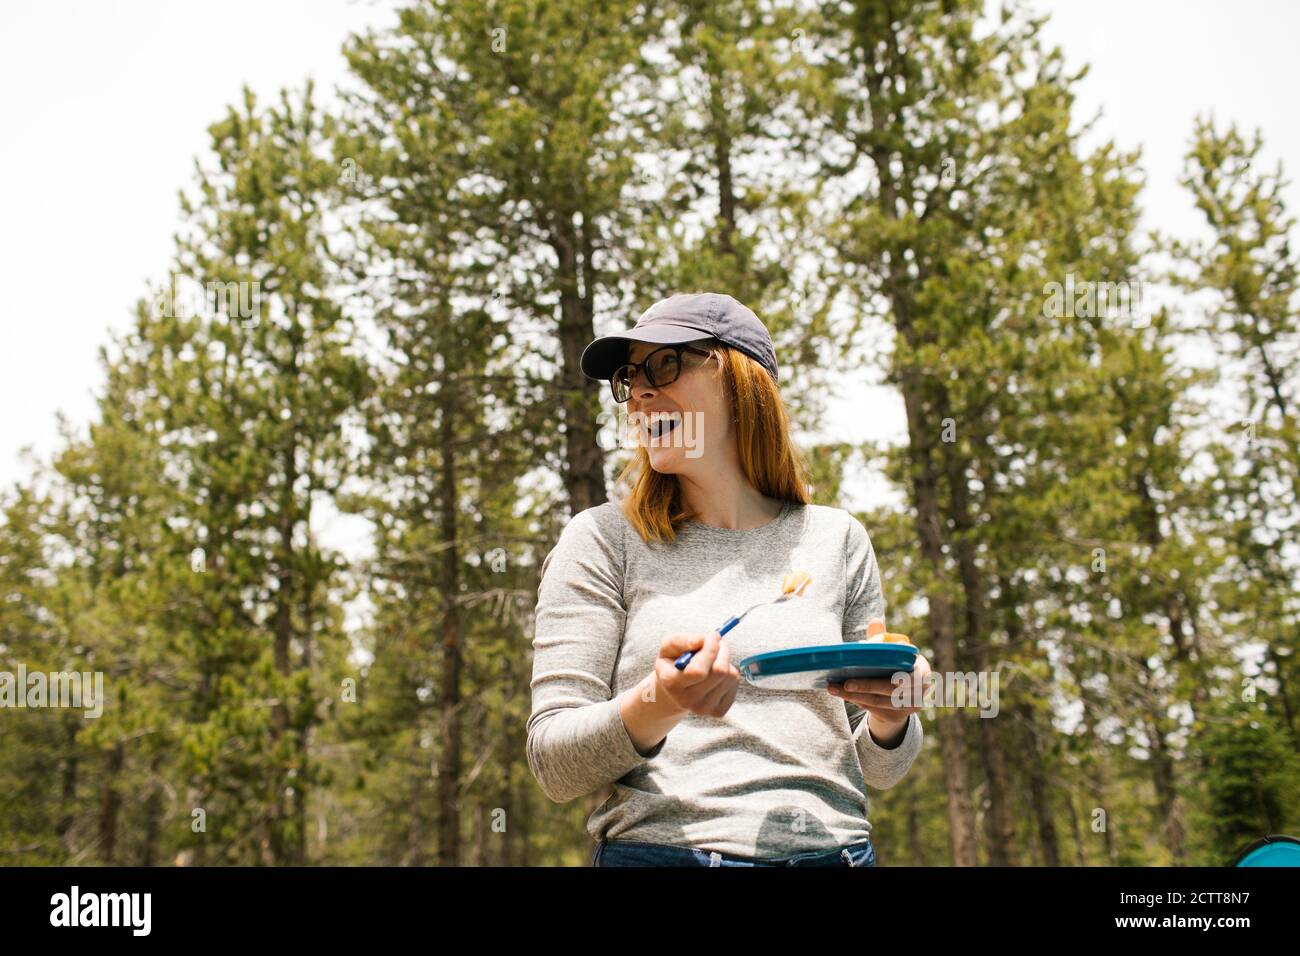 Smiling woman holding plate on camping in forest, Wasatch-Cache National Forest Stock Photo